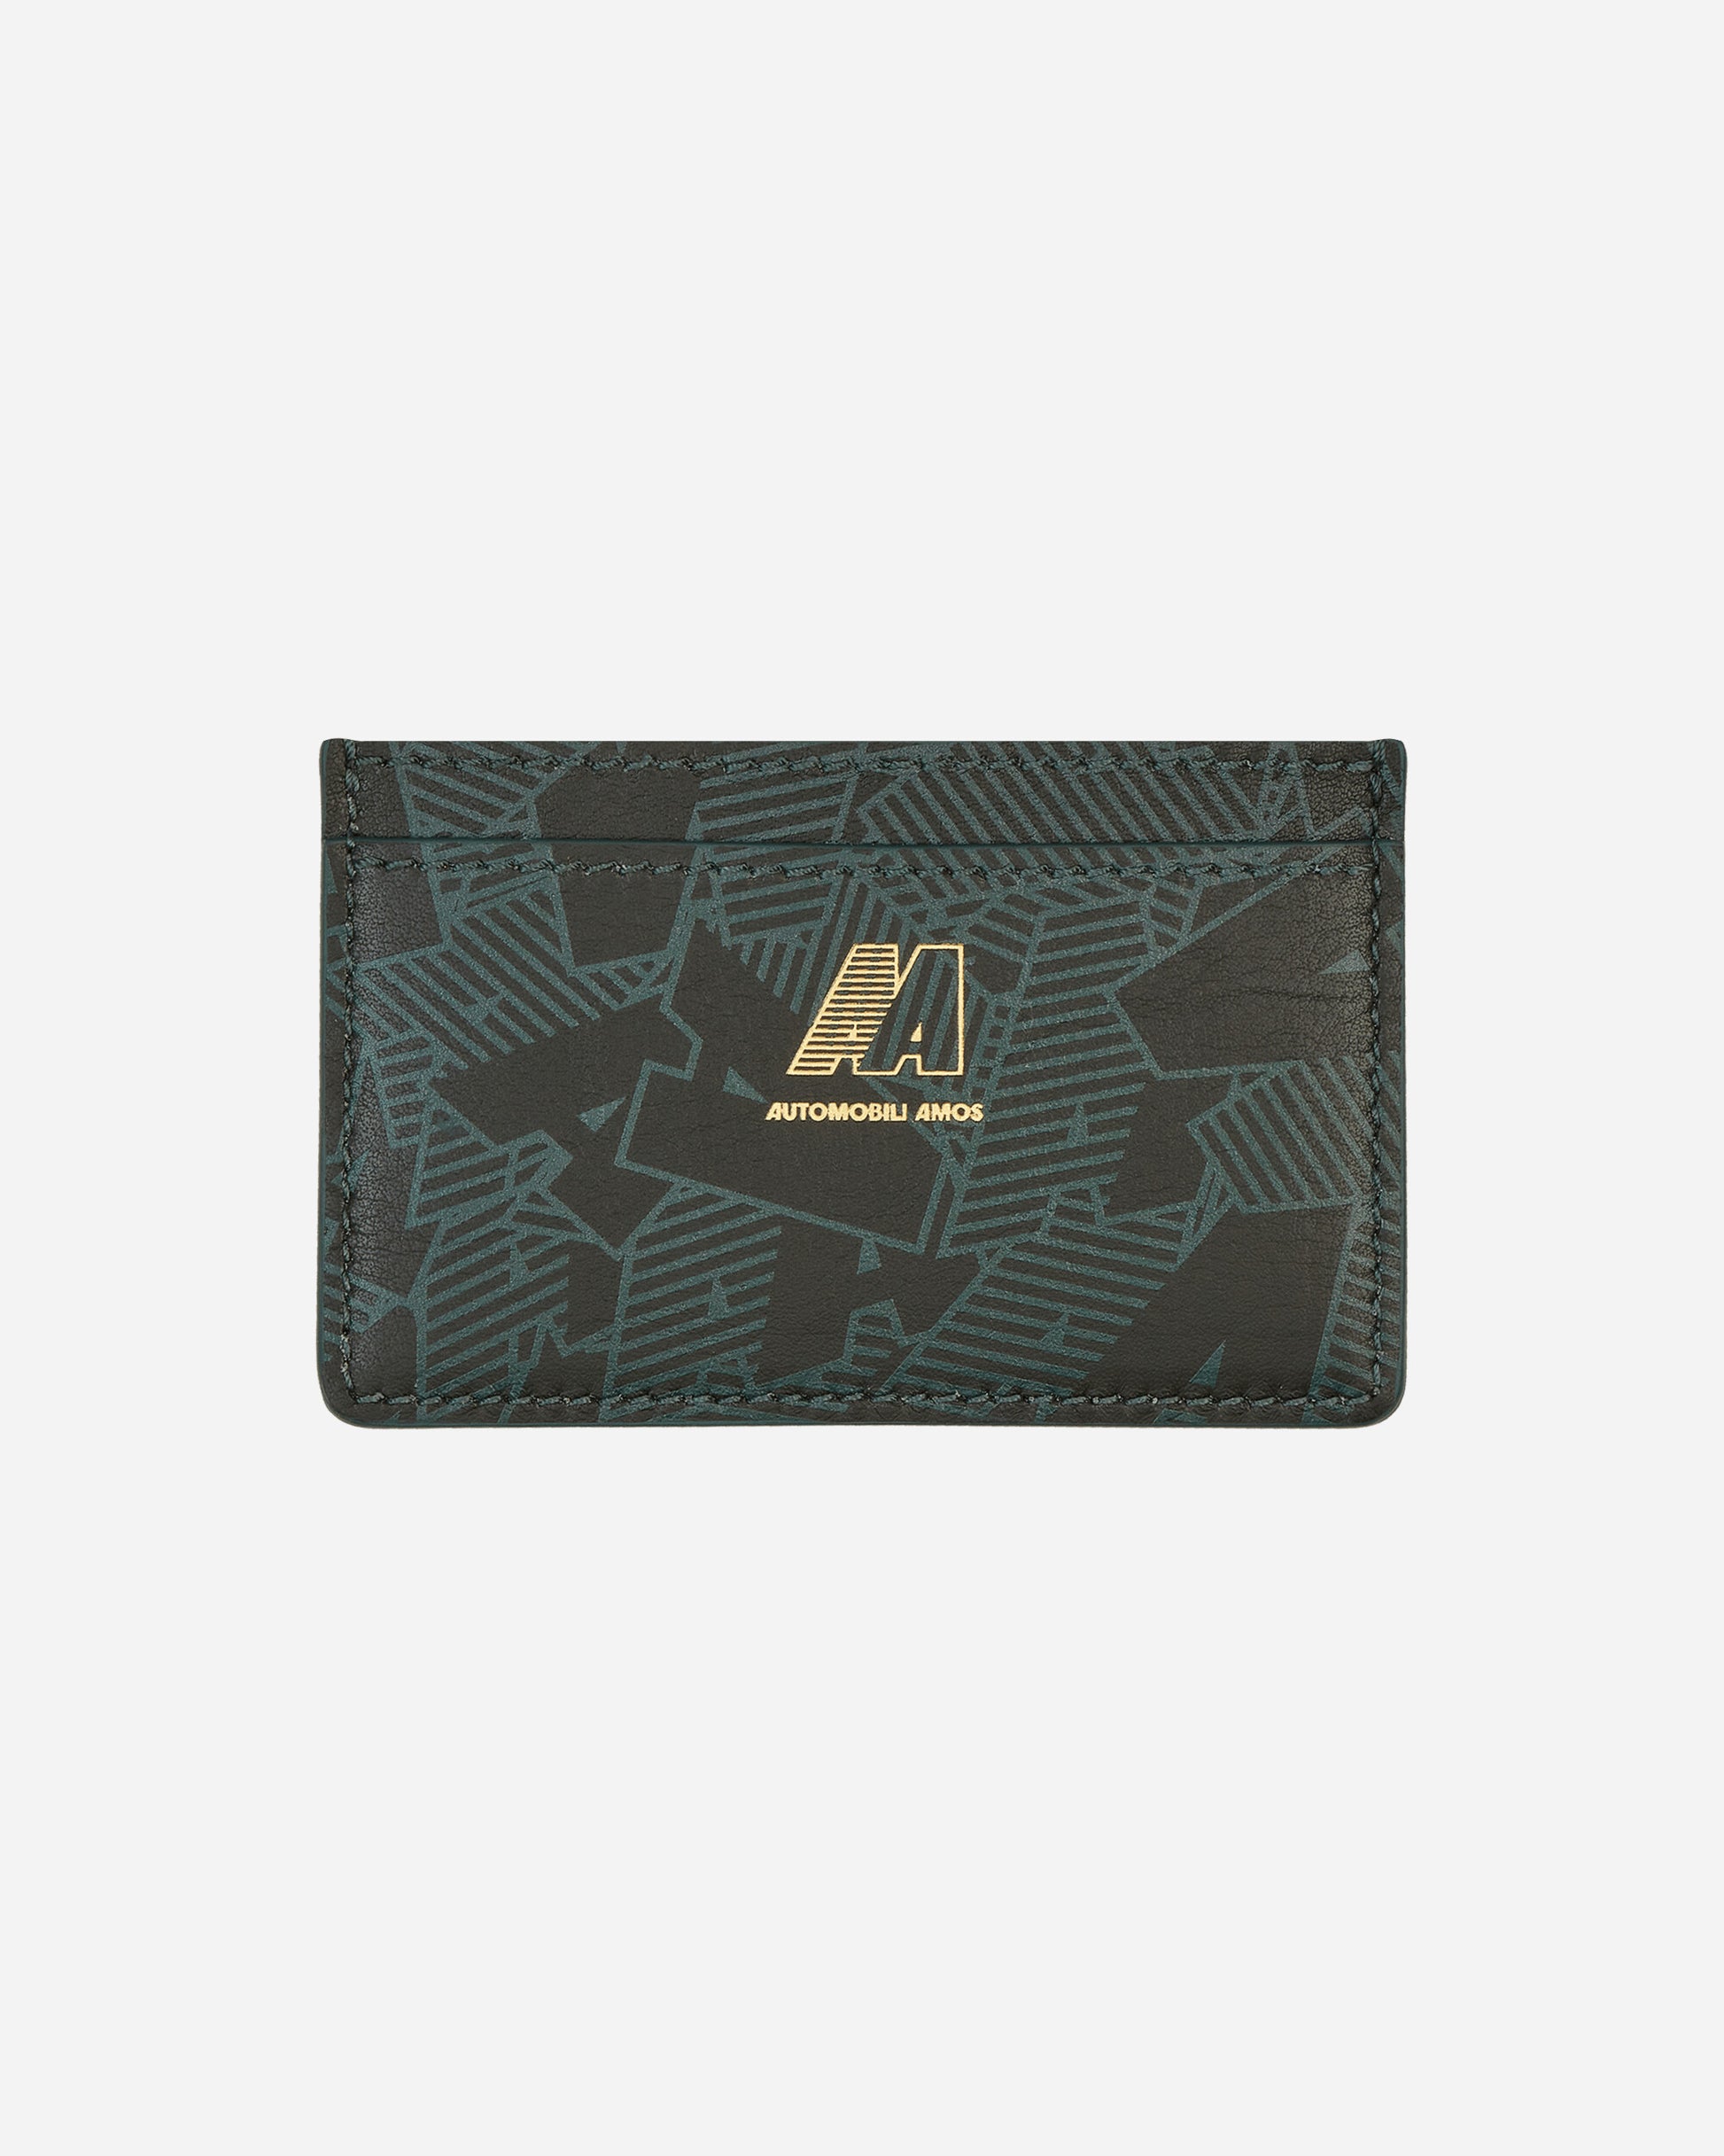 Automobili Amos Amos Wallet Green Wallets and Cardholders Wallets C1AAWL01  GREEN